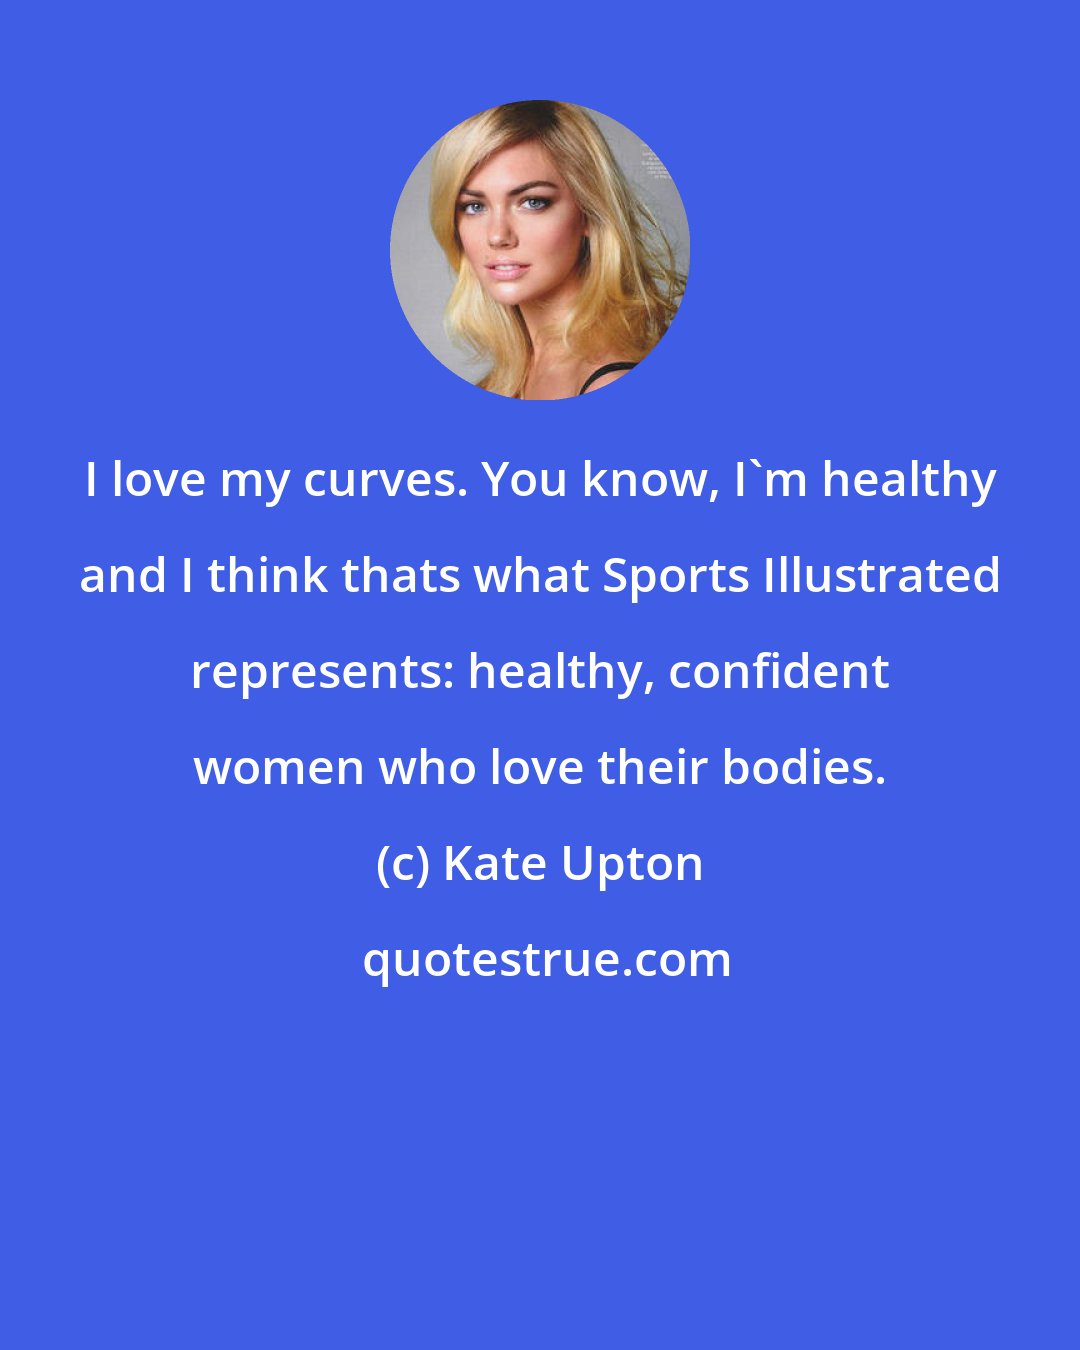 Kate Upton: I love my curves. You know, I'm healthy and I think thats what Sports Illustrated represents: healthy, confident women who love their bodies.